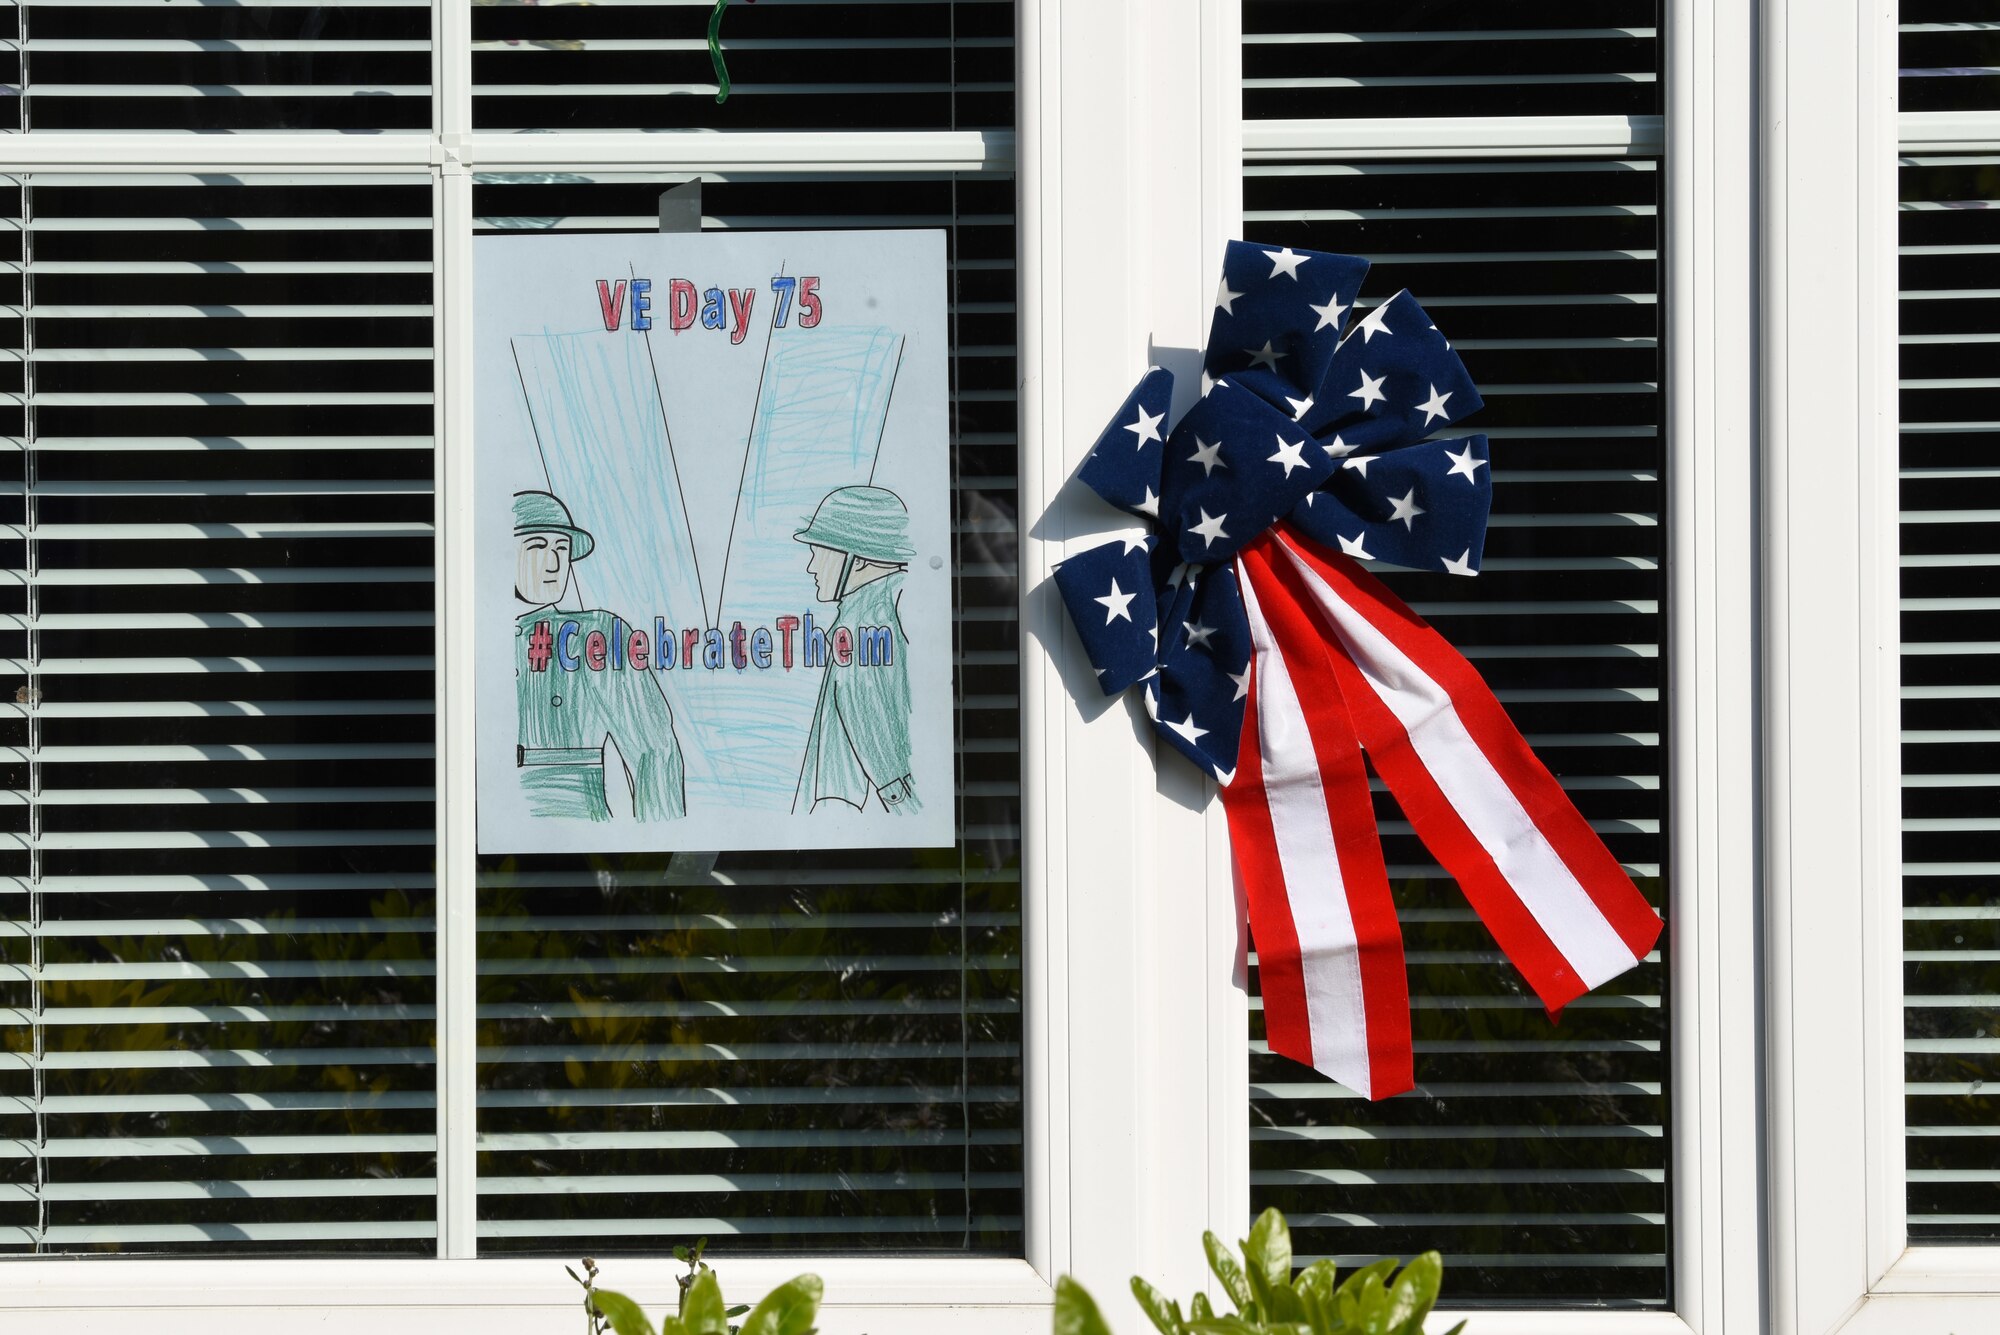 Victory in Europe Day artwork is displayed in a window in Liberty Village at Royal Air Force Lakenheath, England, May 6, 2020. On May 8, the U.K. will join the U.S. and allies around the world to mark the 75th anniversary of VE Day, with virtual programs to avoid the spread of COVID-19. (U.S. Air Force photo by Airman 1st Smith Rhonda Smith)